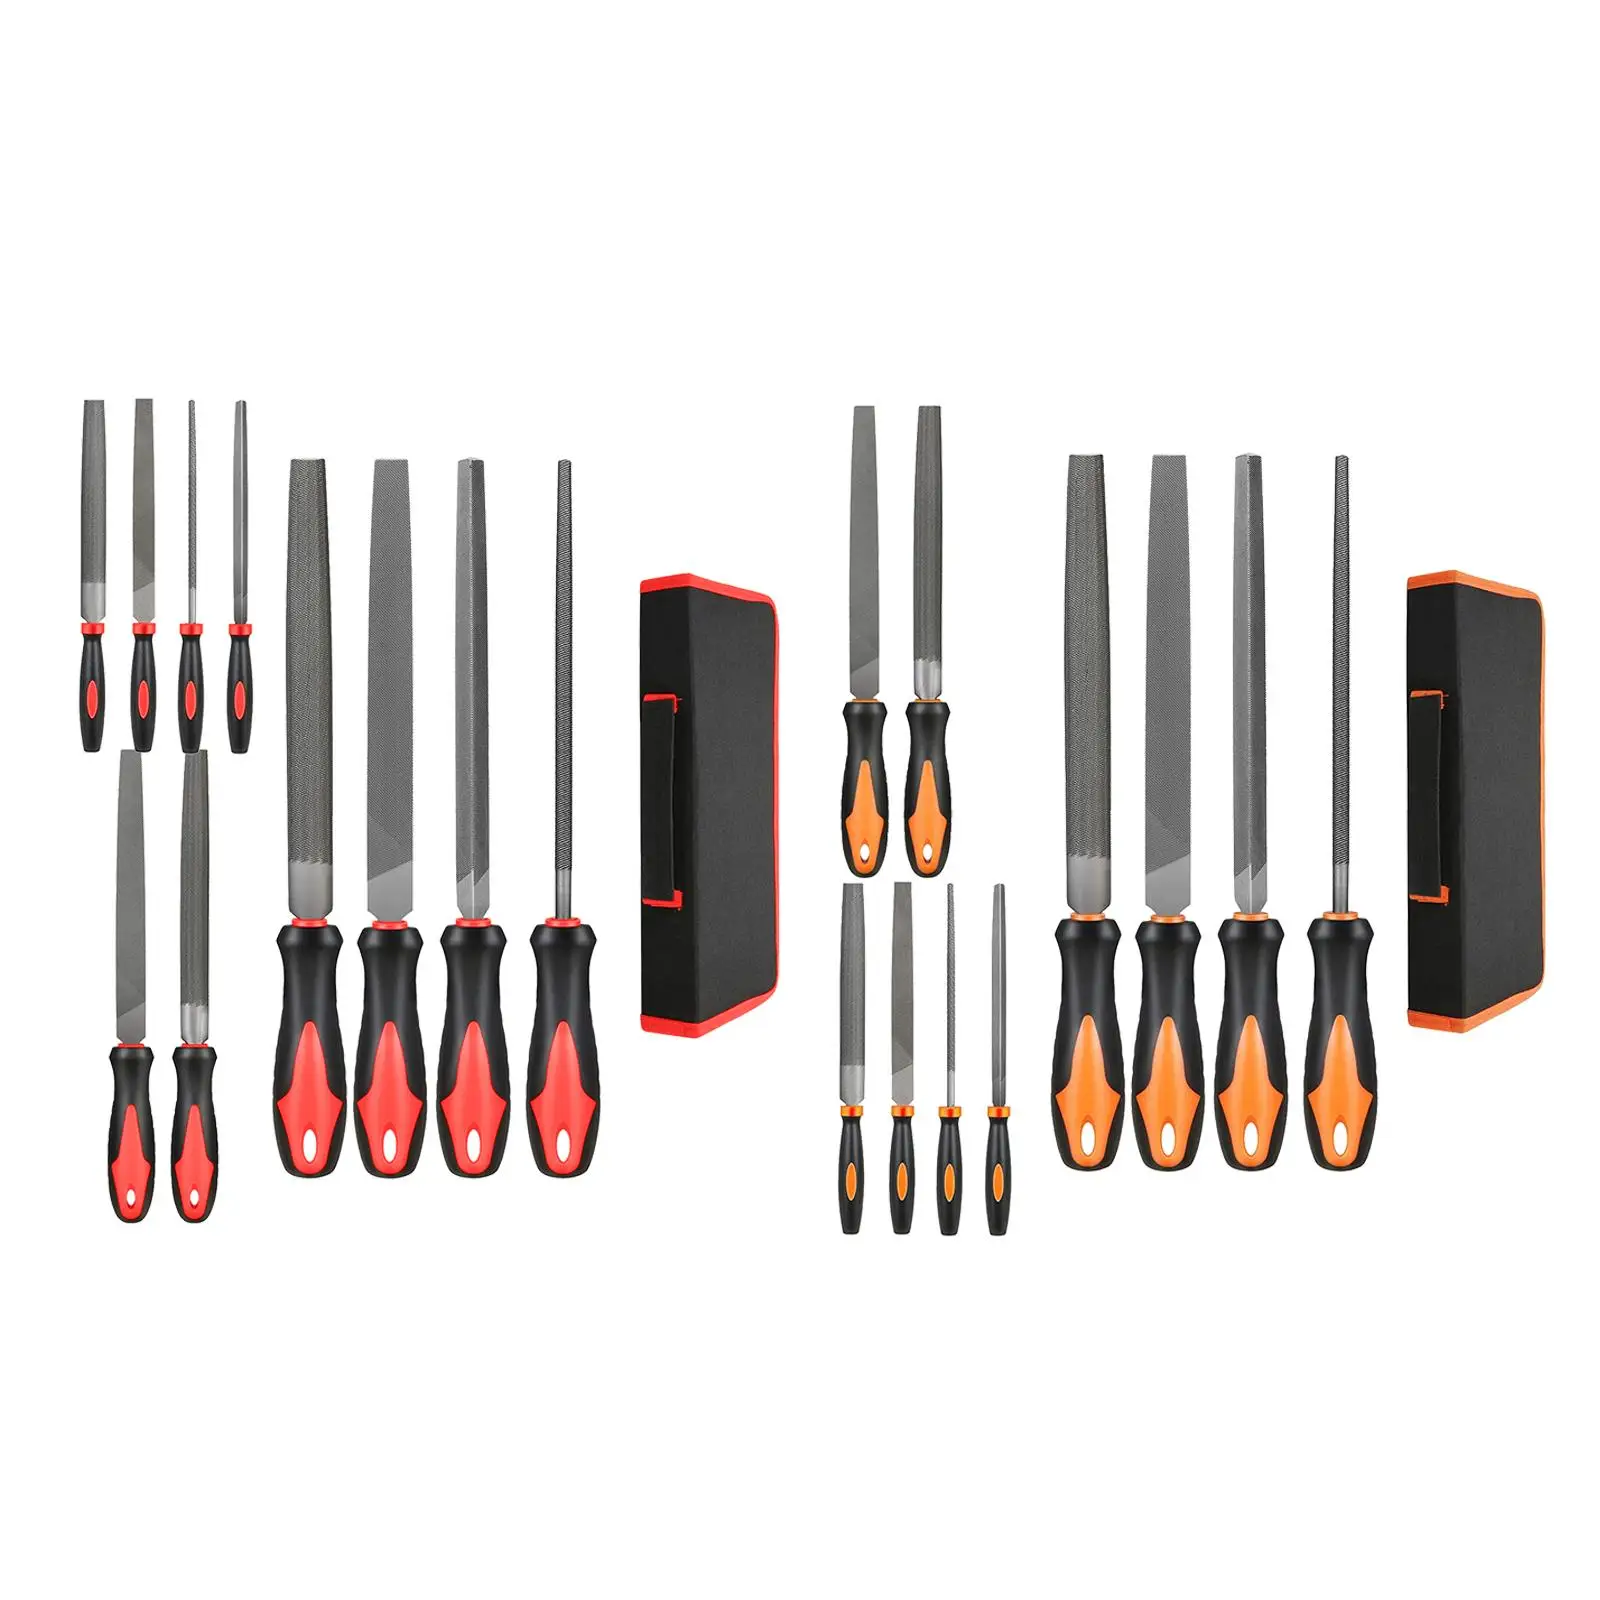 Carbon Steel File Set Precision File Set Woodworking Tools Drop Forging File Set for Carpentry Jewelry Wood DIY Handmade Model